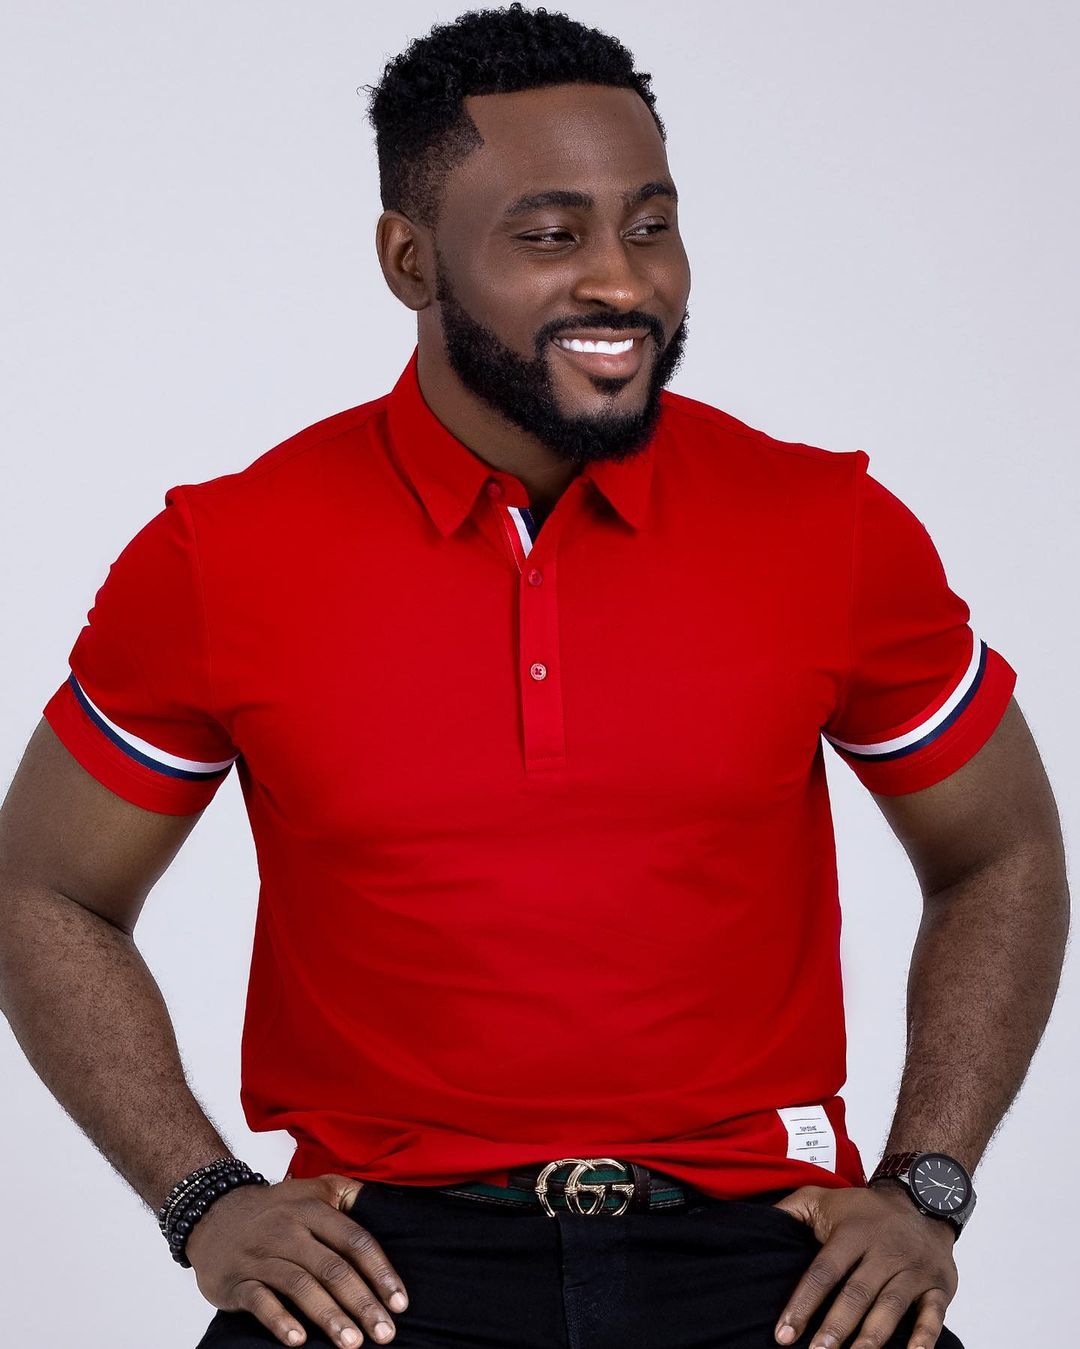 #BBNaija: "Whatever it takes, I'd beg to go back to my girlfriend" - Pere (Video)